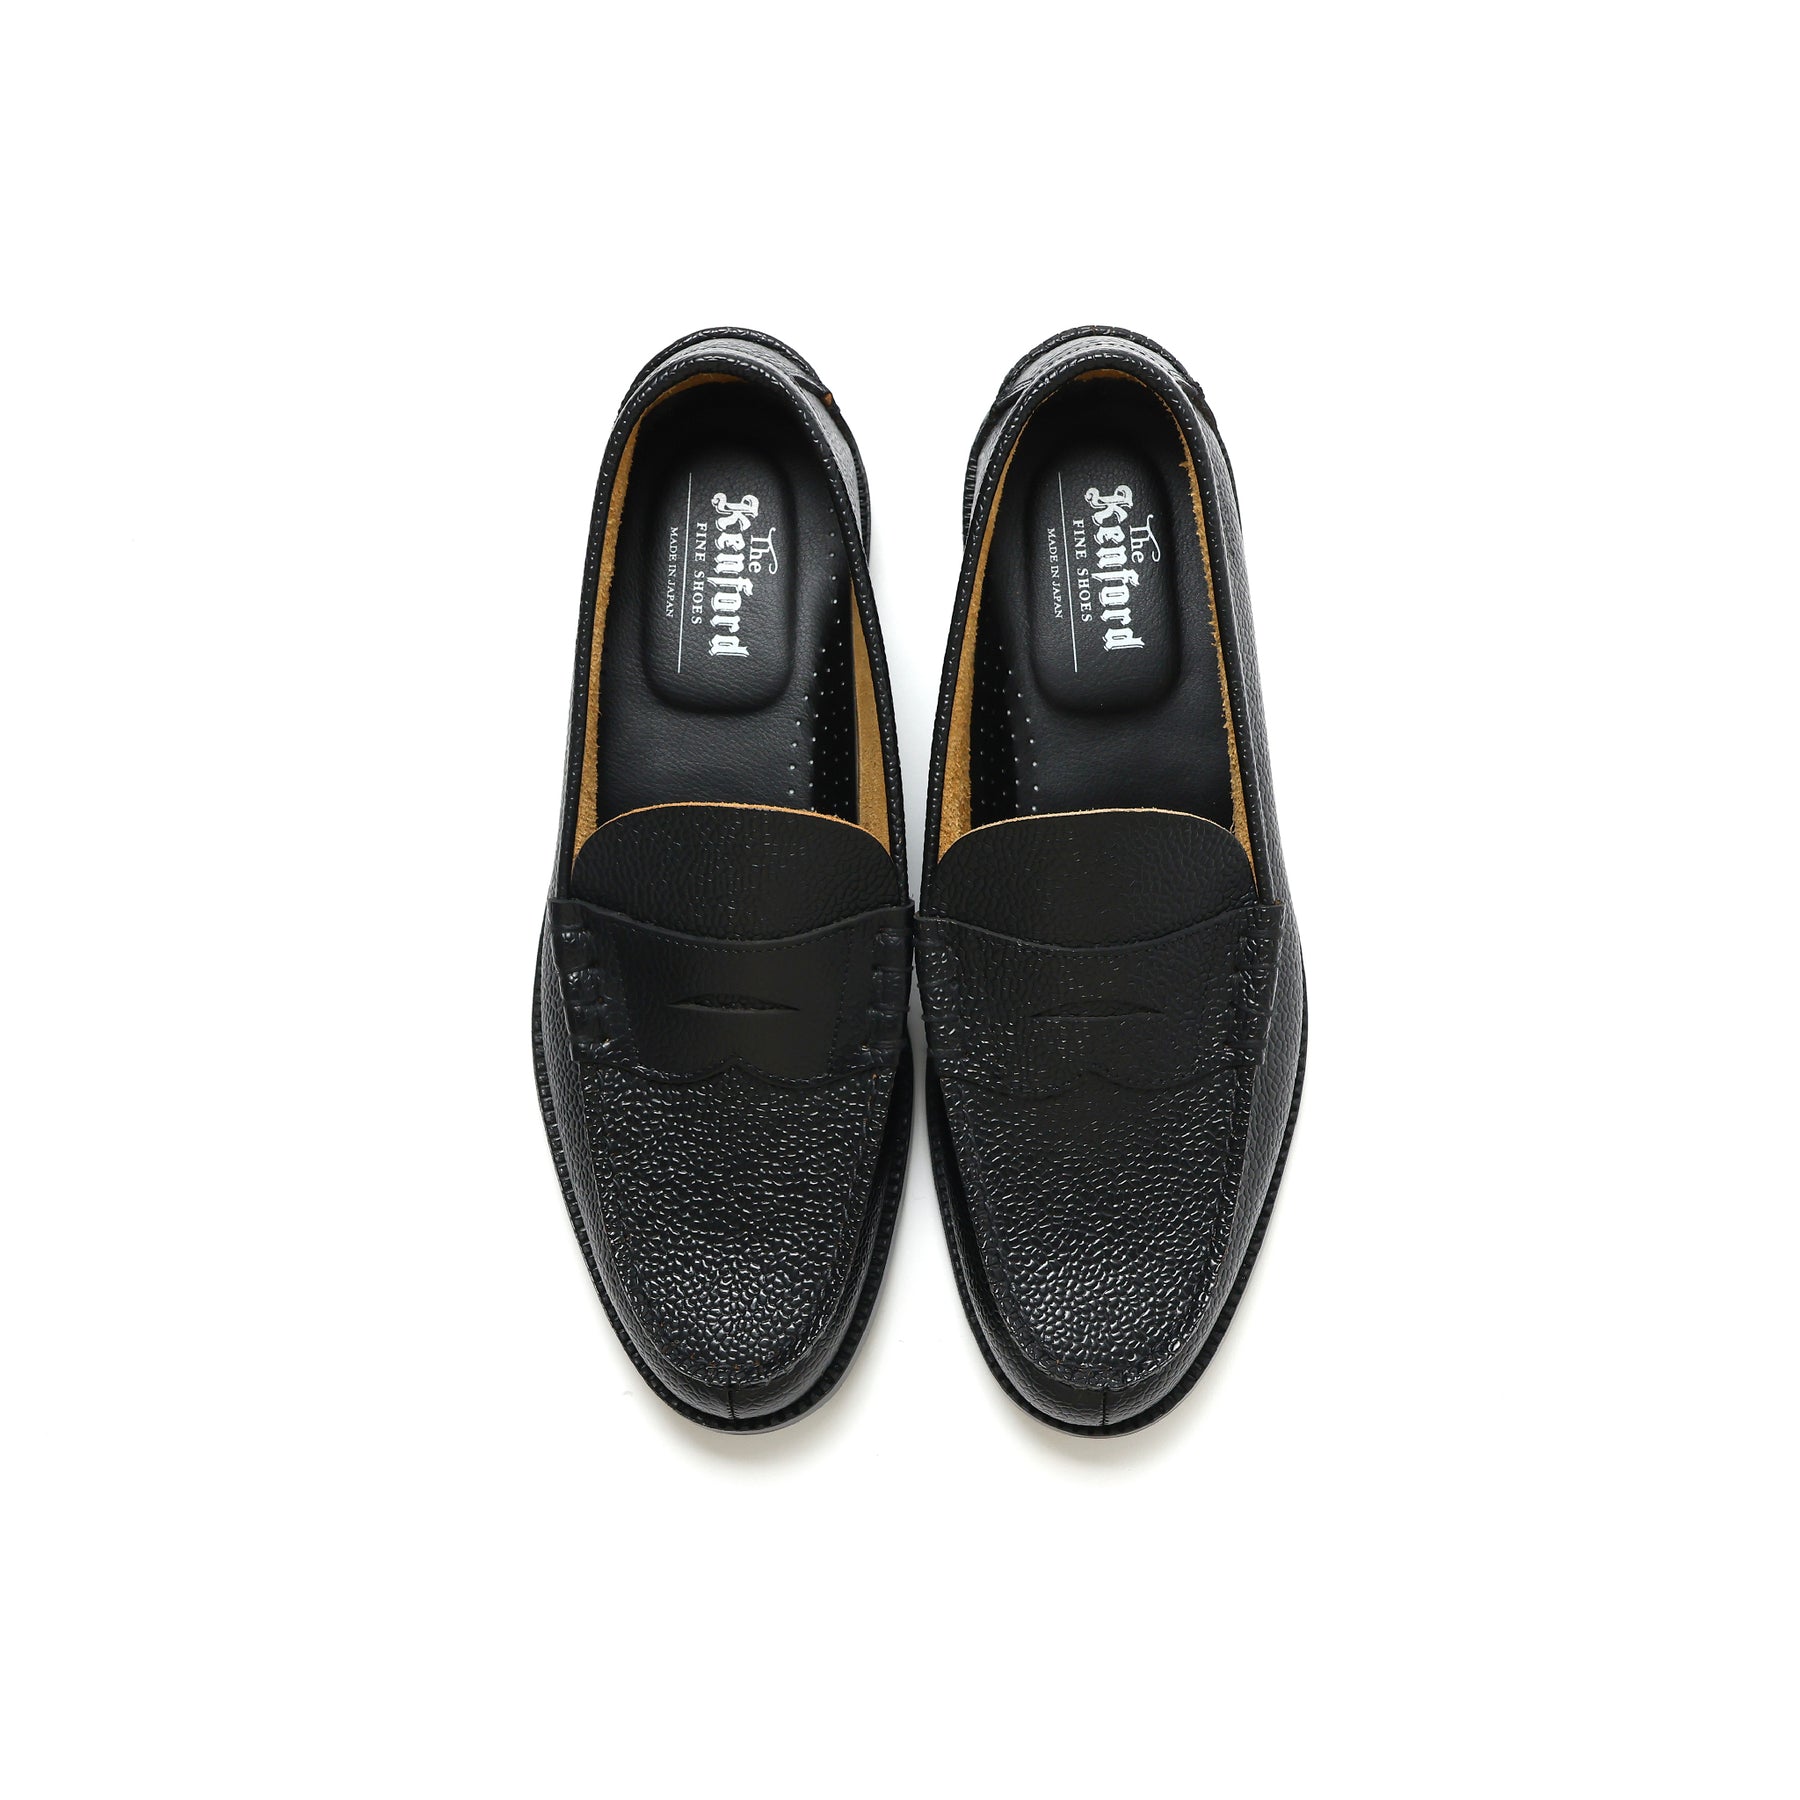 THE KENFORD FINESHOES Official Order MENS EMBOSSED SCOTCH Embossed Loafer/Black Scotch Grain